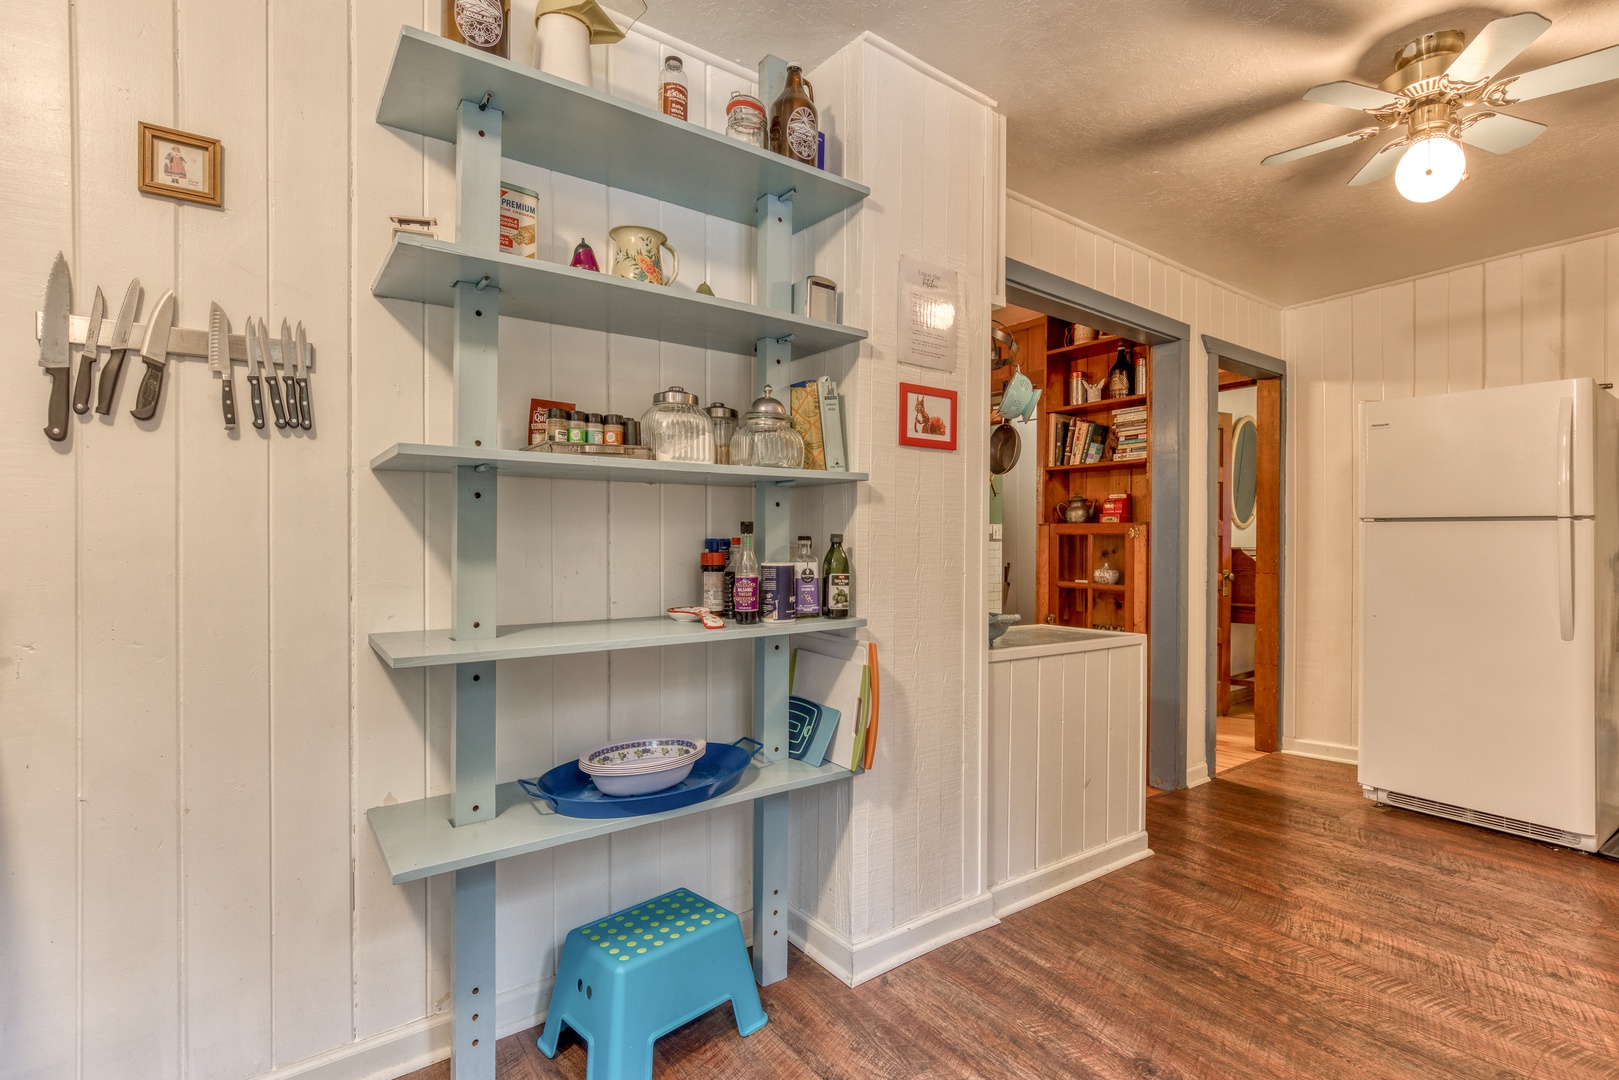 Brightwood Vacation Rentals, Springbrook Cabin - Fully stocked kitchen shelf